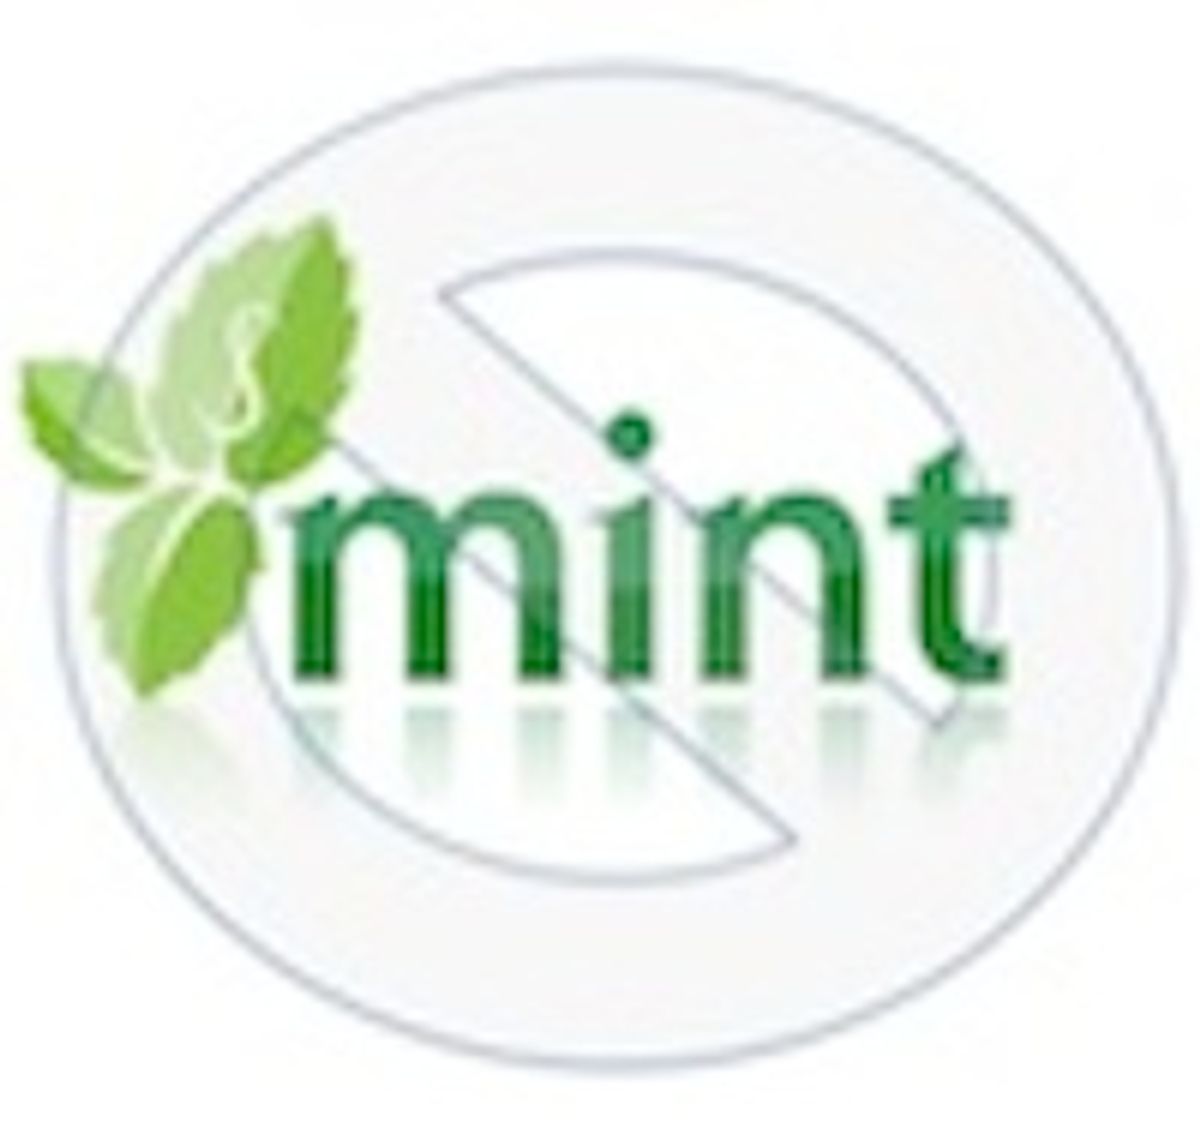 Why Mint Doesn't Measure Up